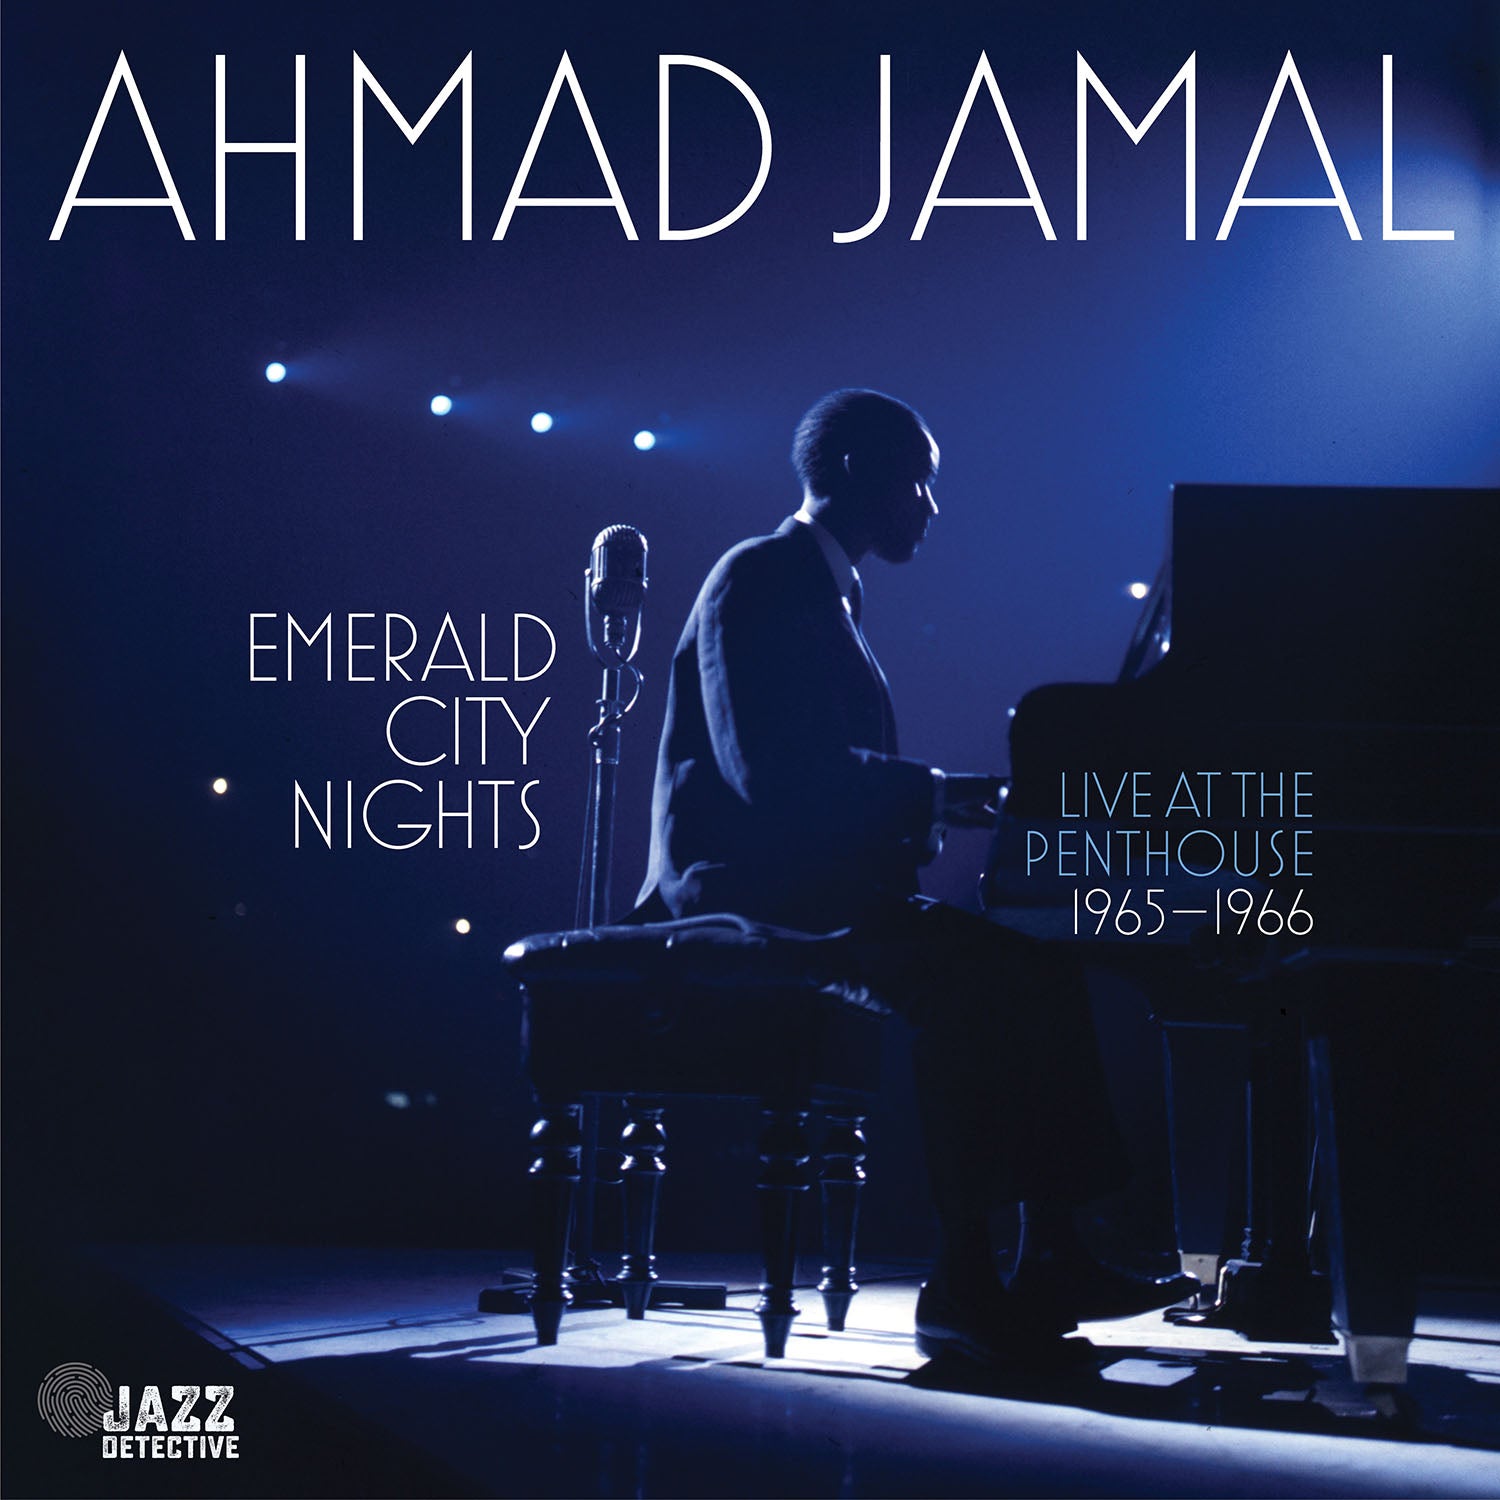 Ahmad Jamal - Emerald City Nights: Live At The Penthouse (1965-1966) 2LP (RSD Exclusive)